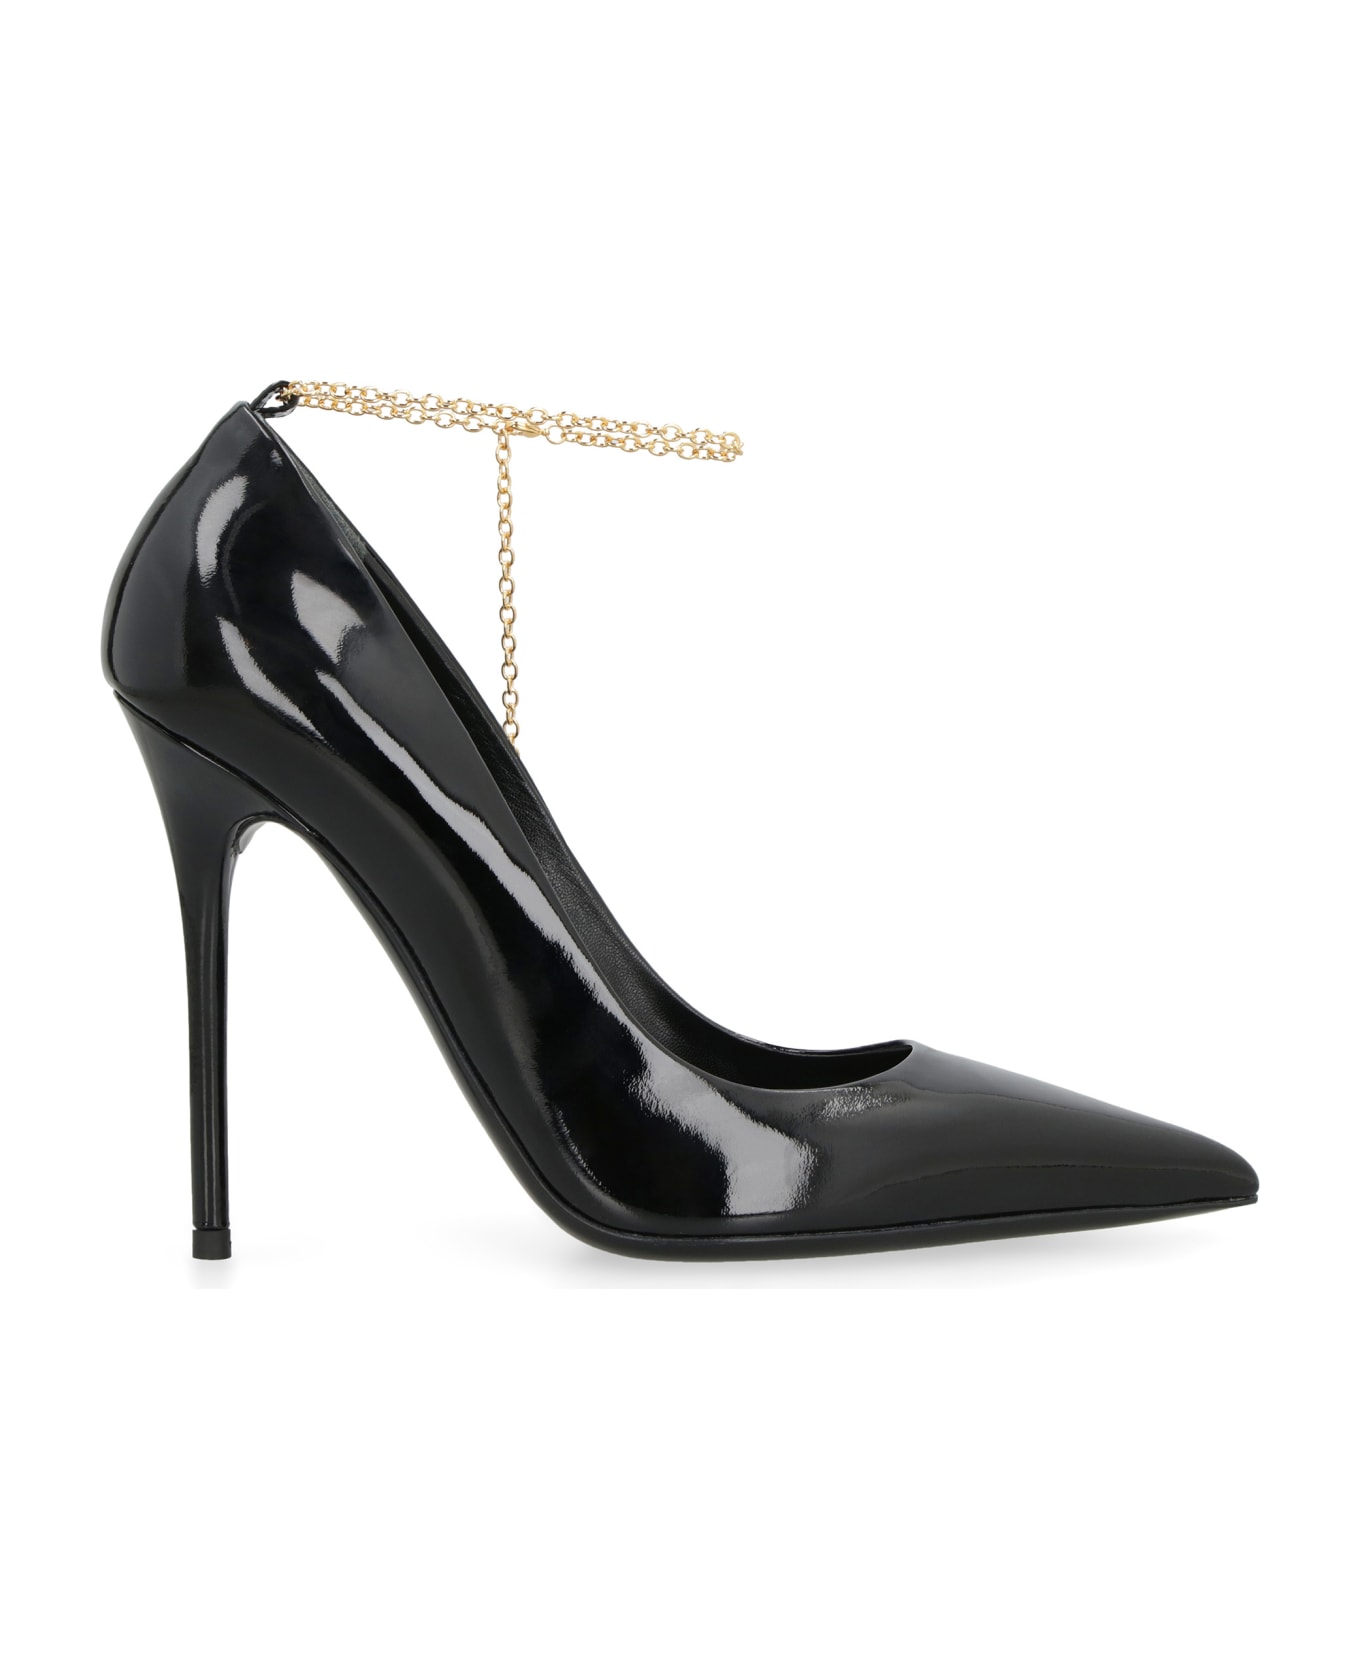 Tom Ford Patent Leather Pumps - black ハイヒール